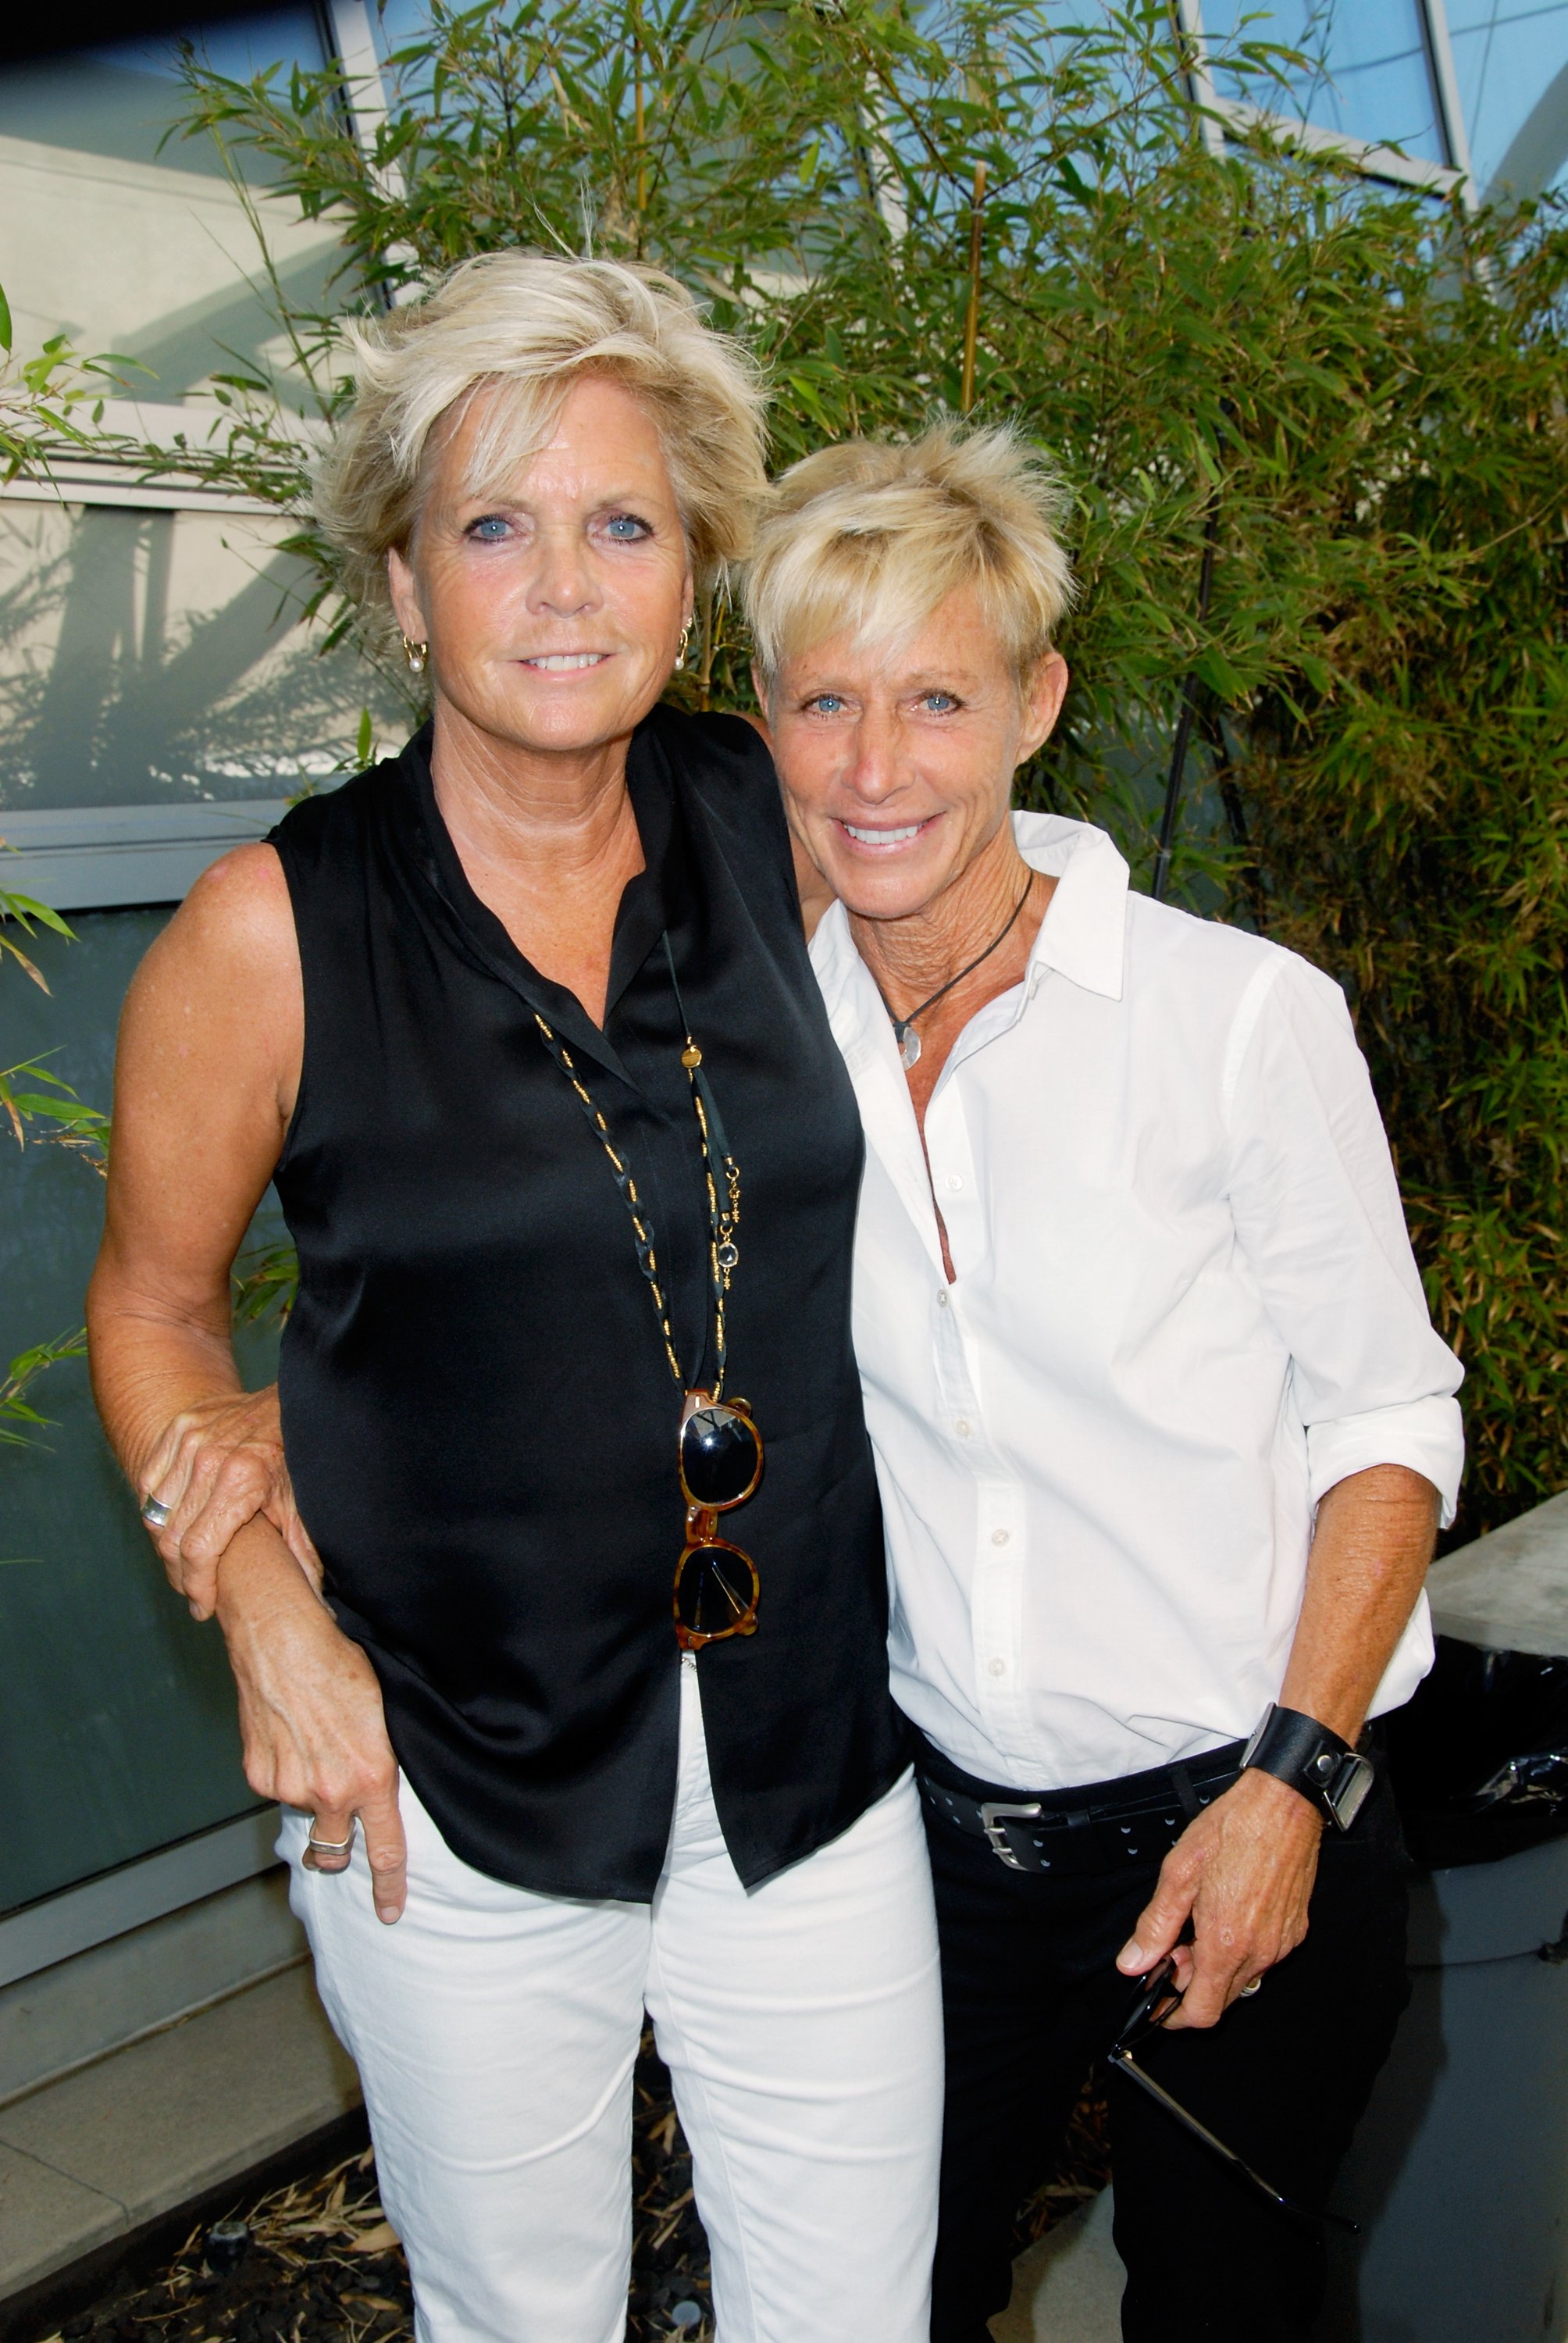 Meredith Baxter and her partner Nancy Locke at the "Outfest VIP Women's Soiree" on June 24, 2012, in Los Angeles, California | Source: Getty Images